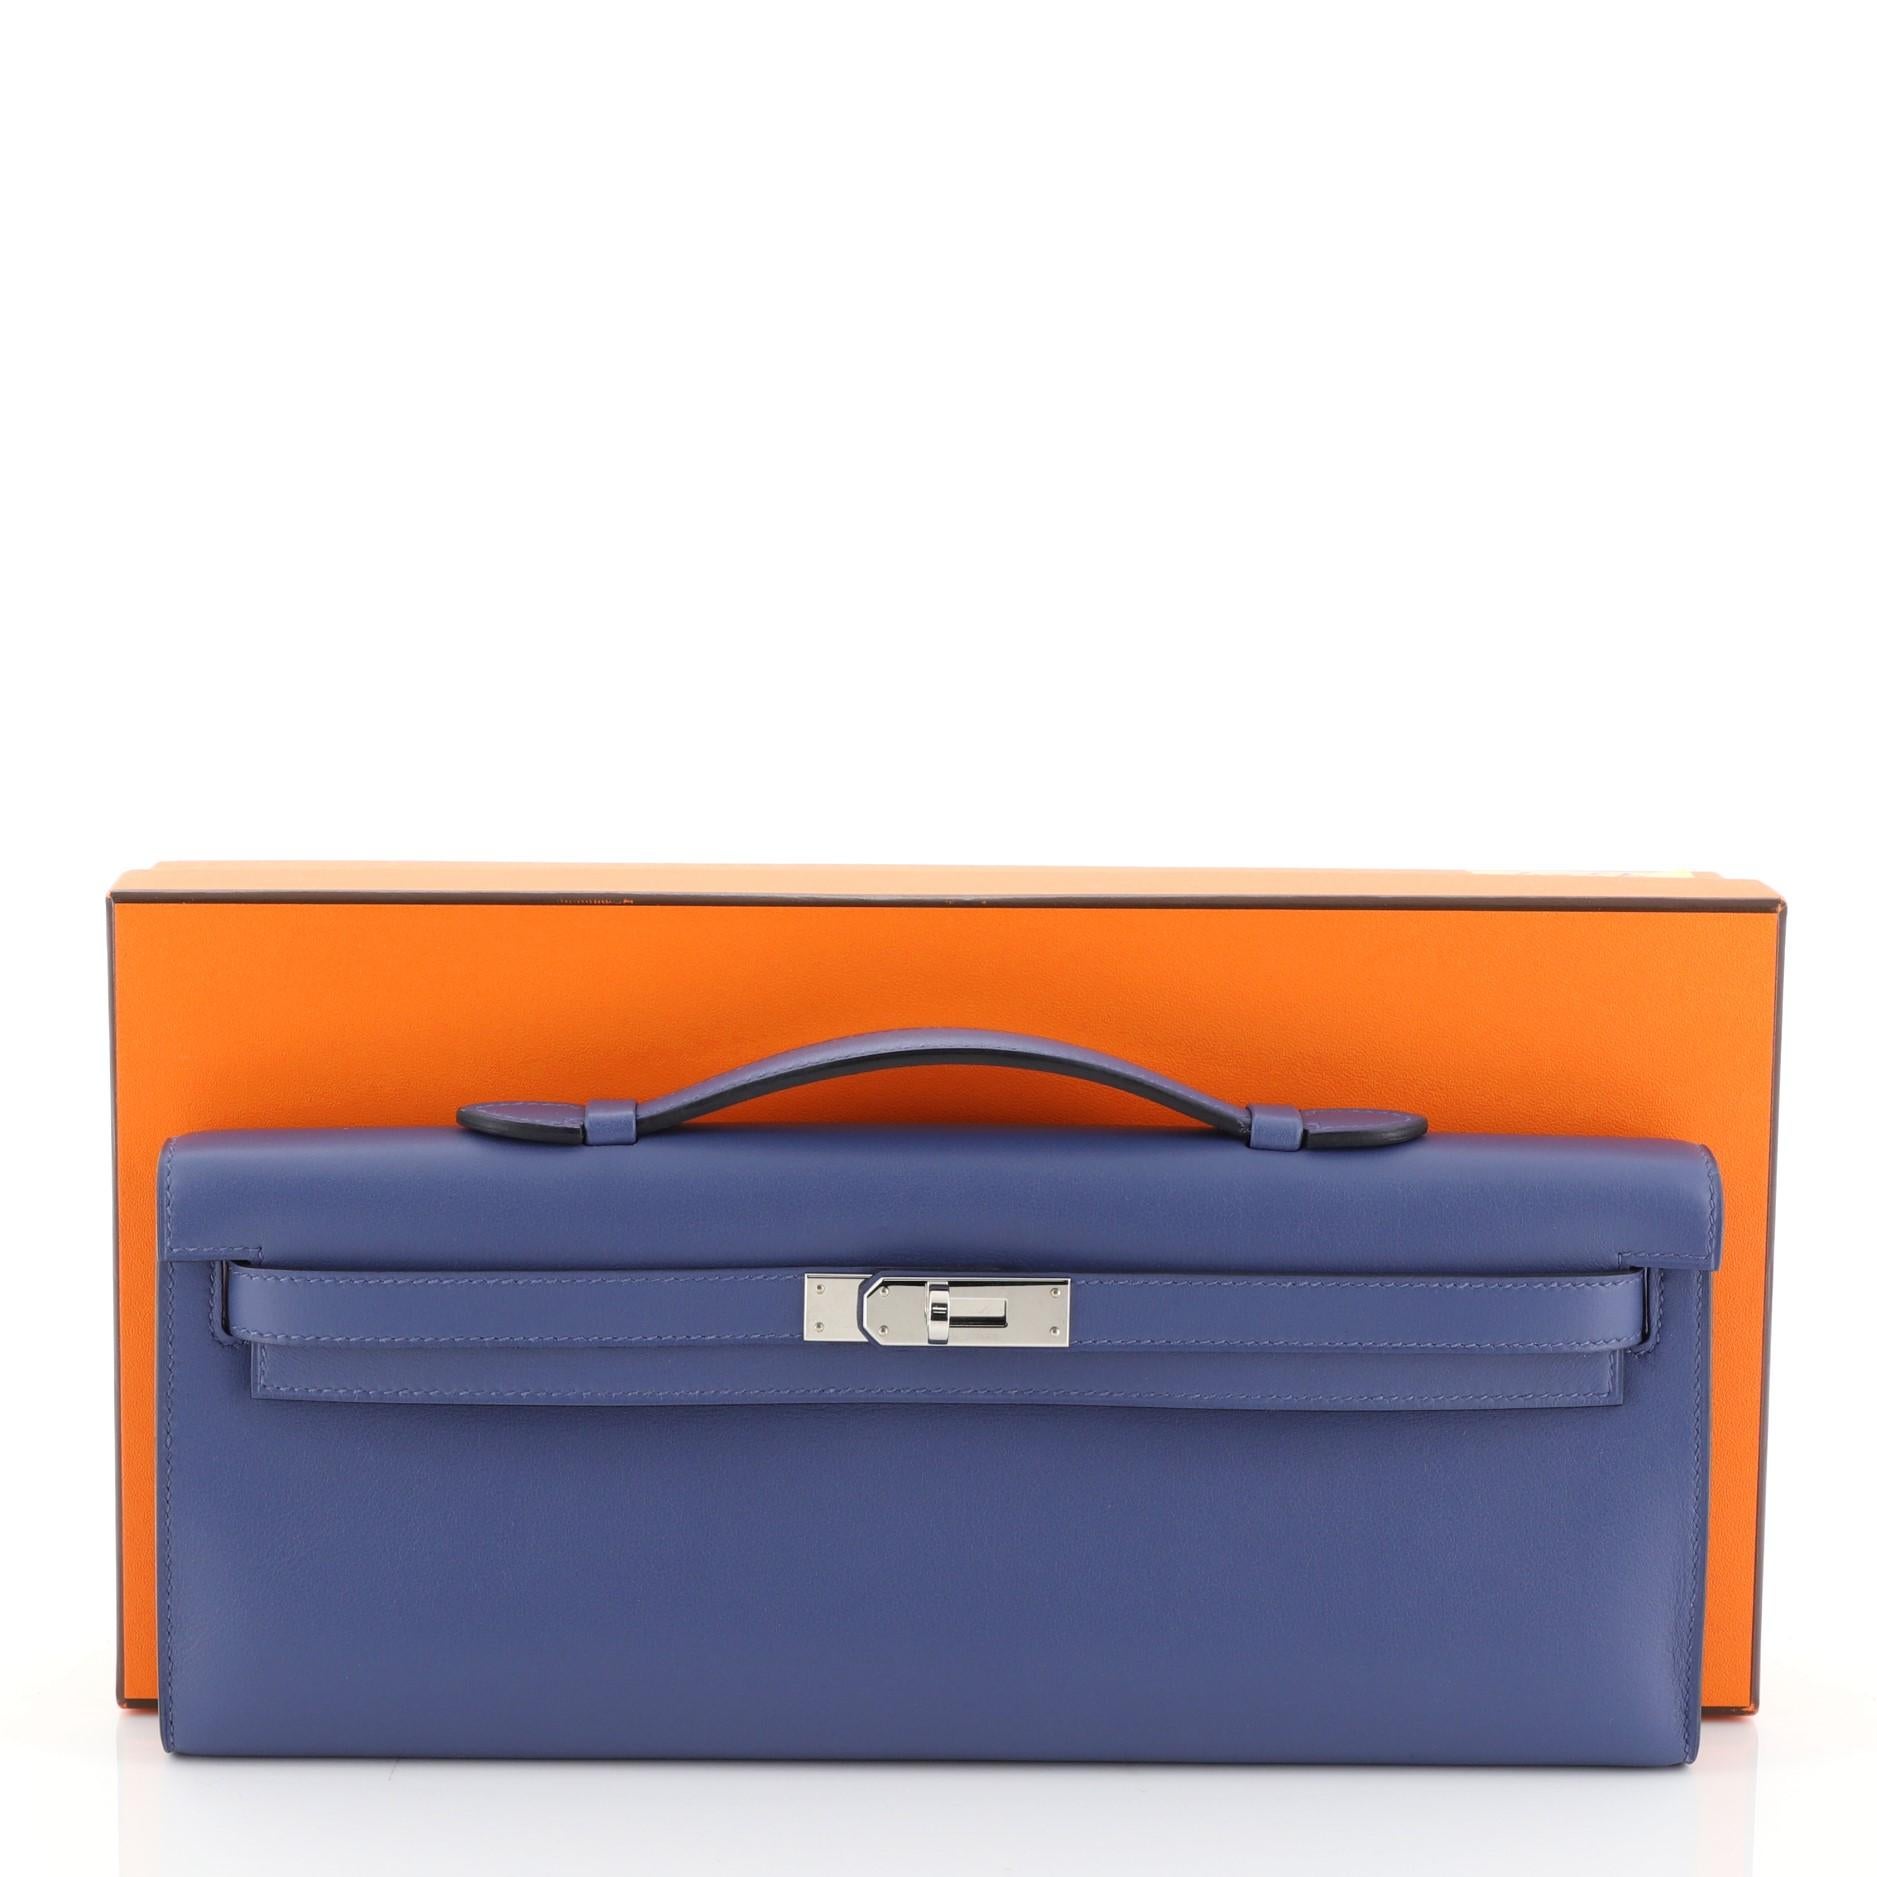 This Hermes Kelly Cut Pochette Swift, crafted in Bleu Brighton blue Swift leather, features a top handle, frontal flap, and palladium hardware. Its turn-lock closure opens to a Bleu Brighton blue Swift leather interior. Date stamp reads: A (2017).